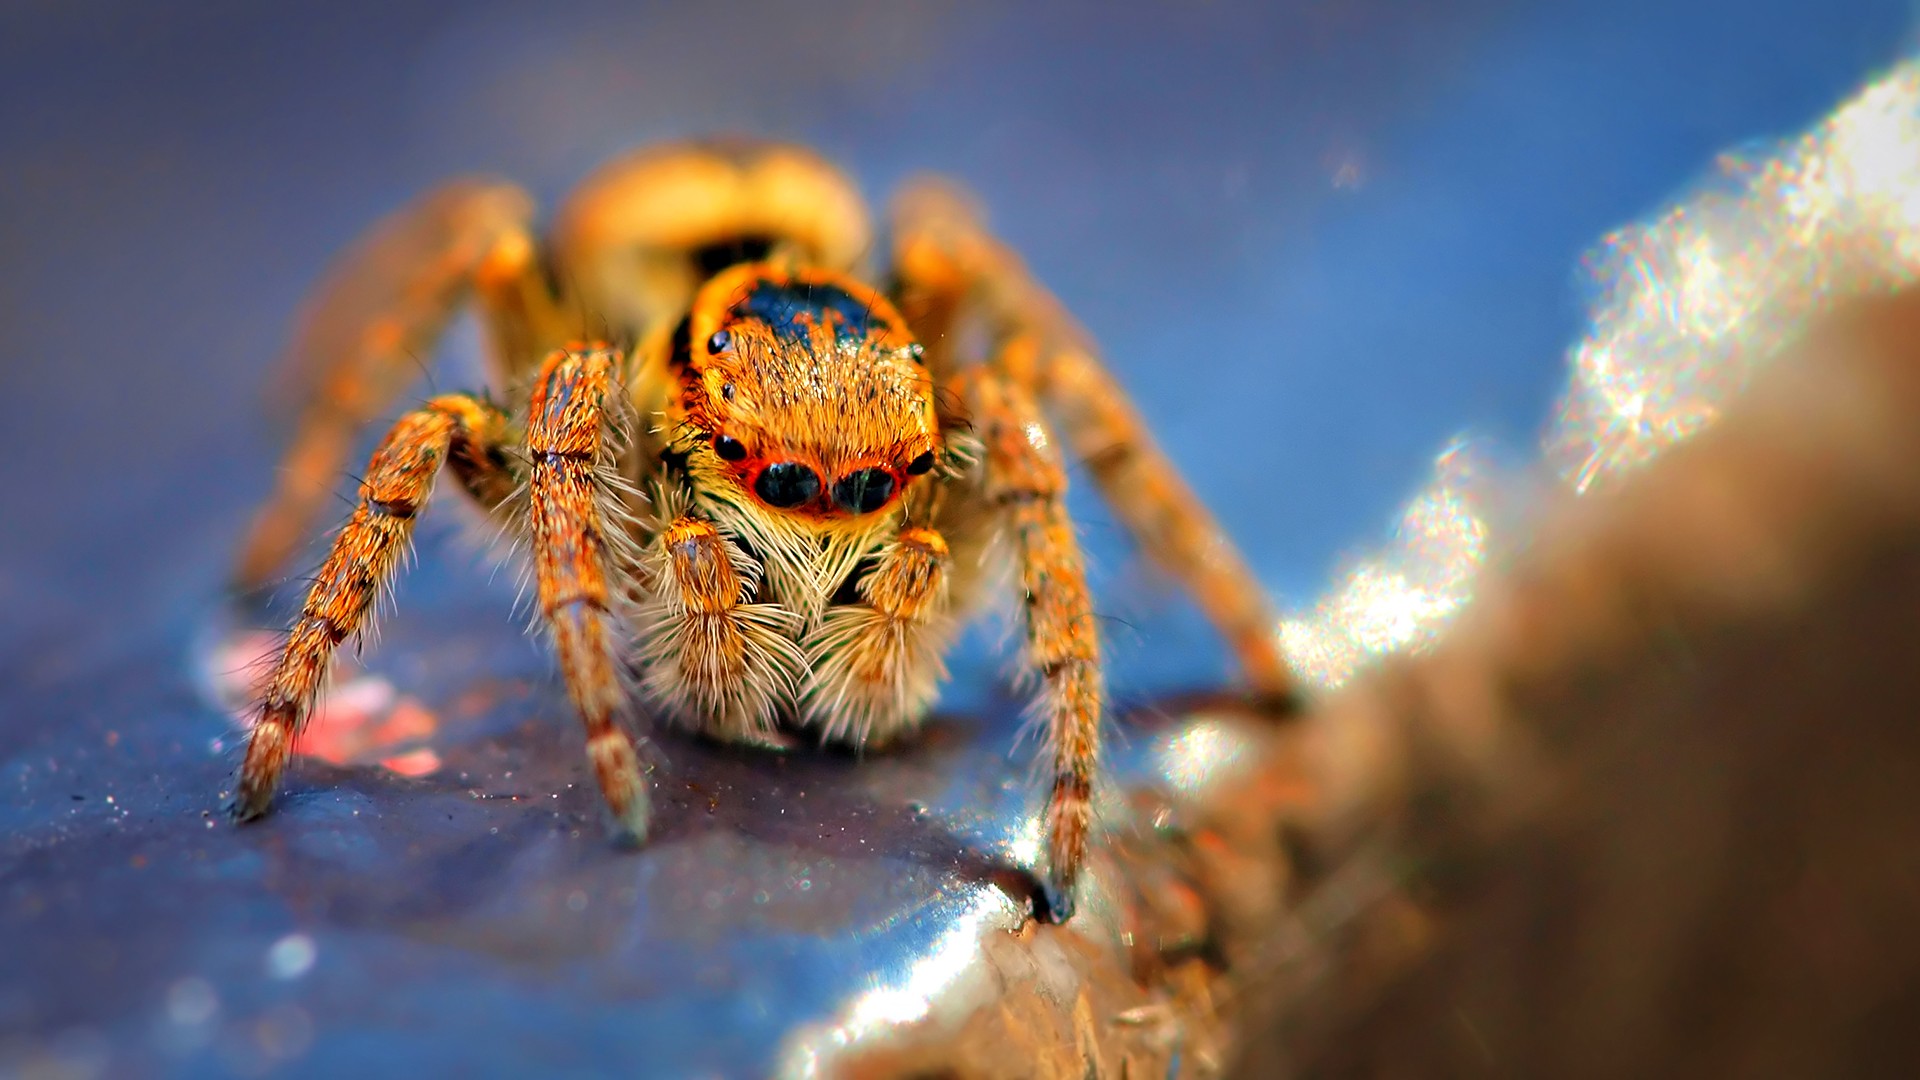 Spider Macro Photography Wallpaper Ongur